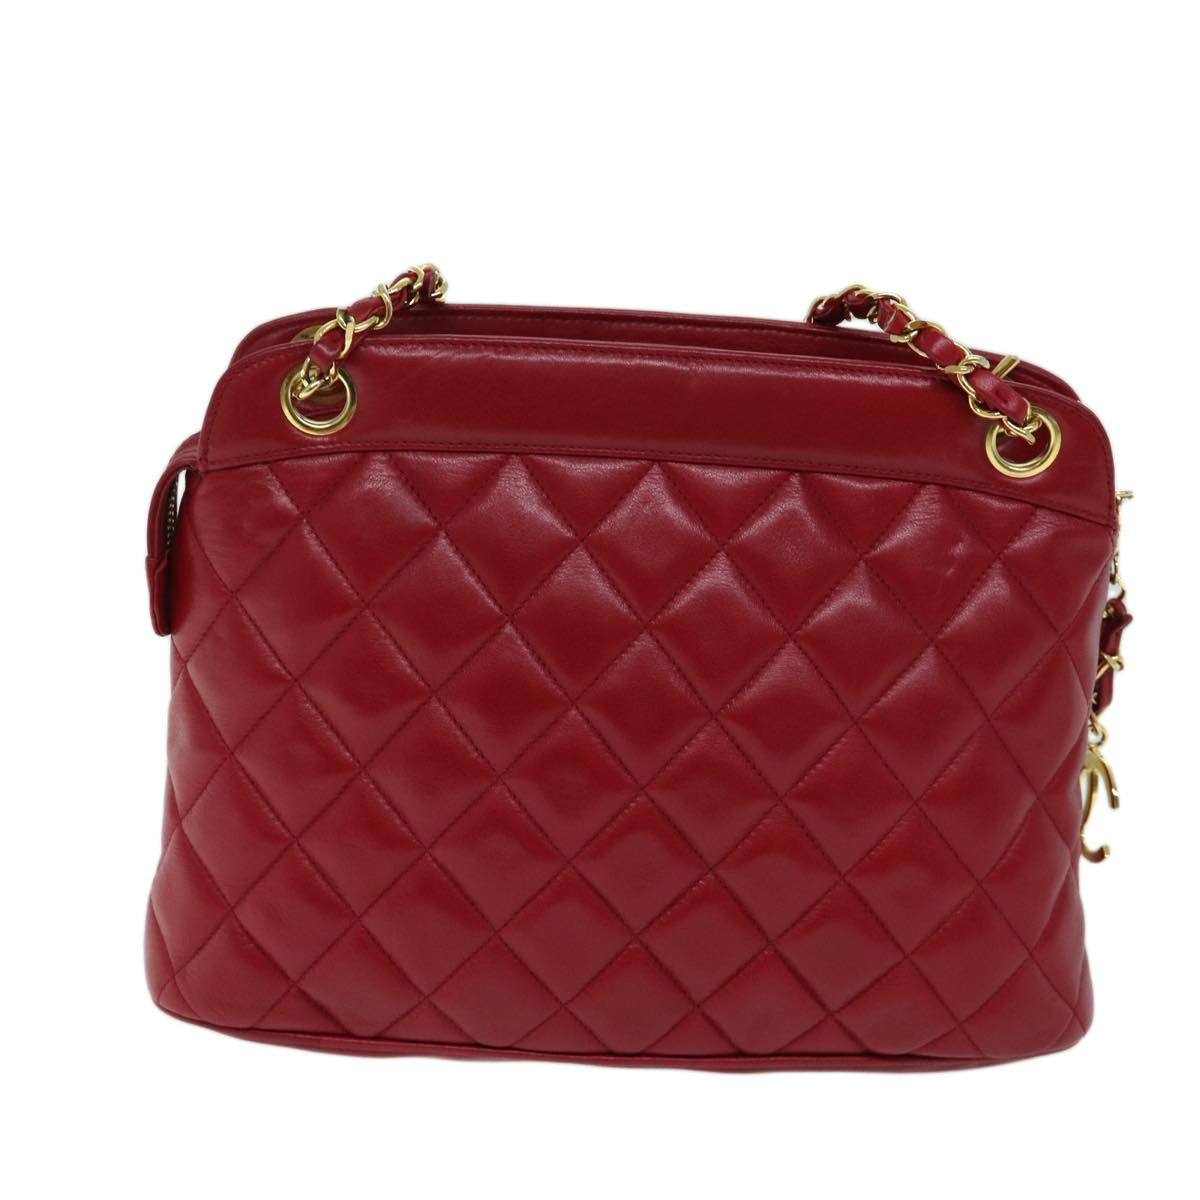 CHANEL Matelasse Chain Shoulder Bag Leather Red CC Auth yk11662 - 0